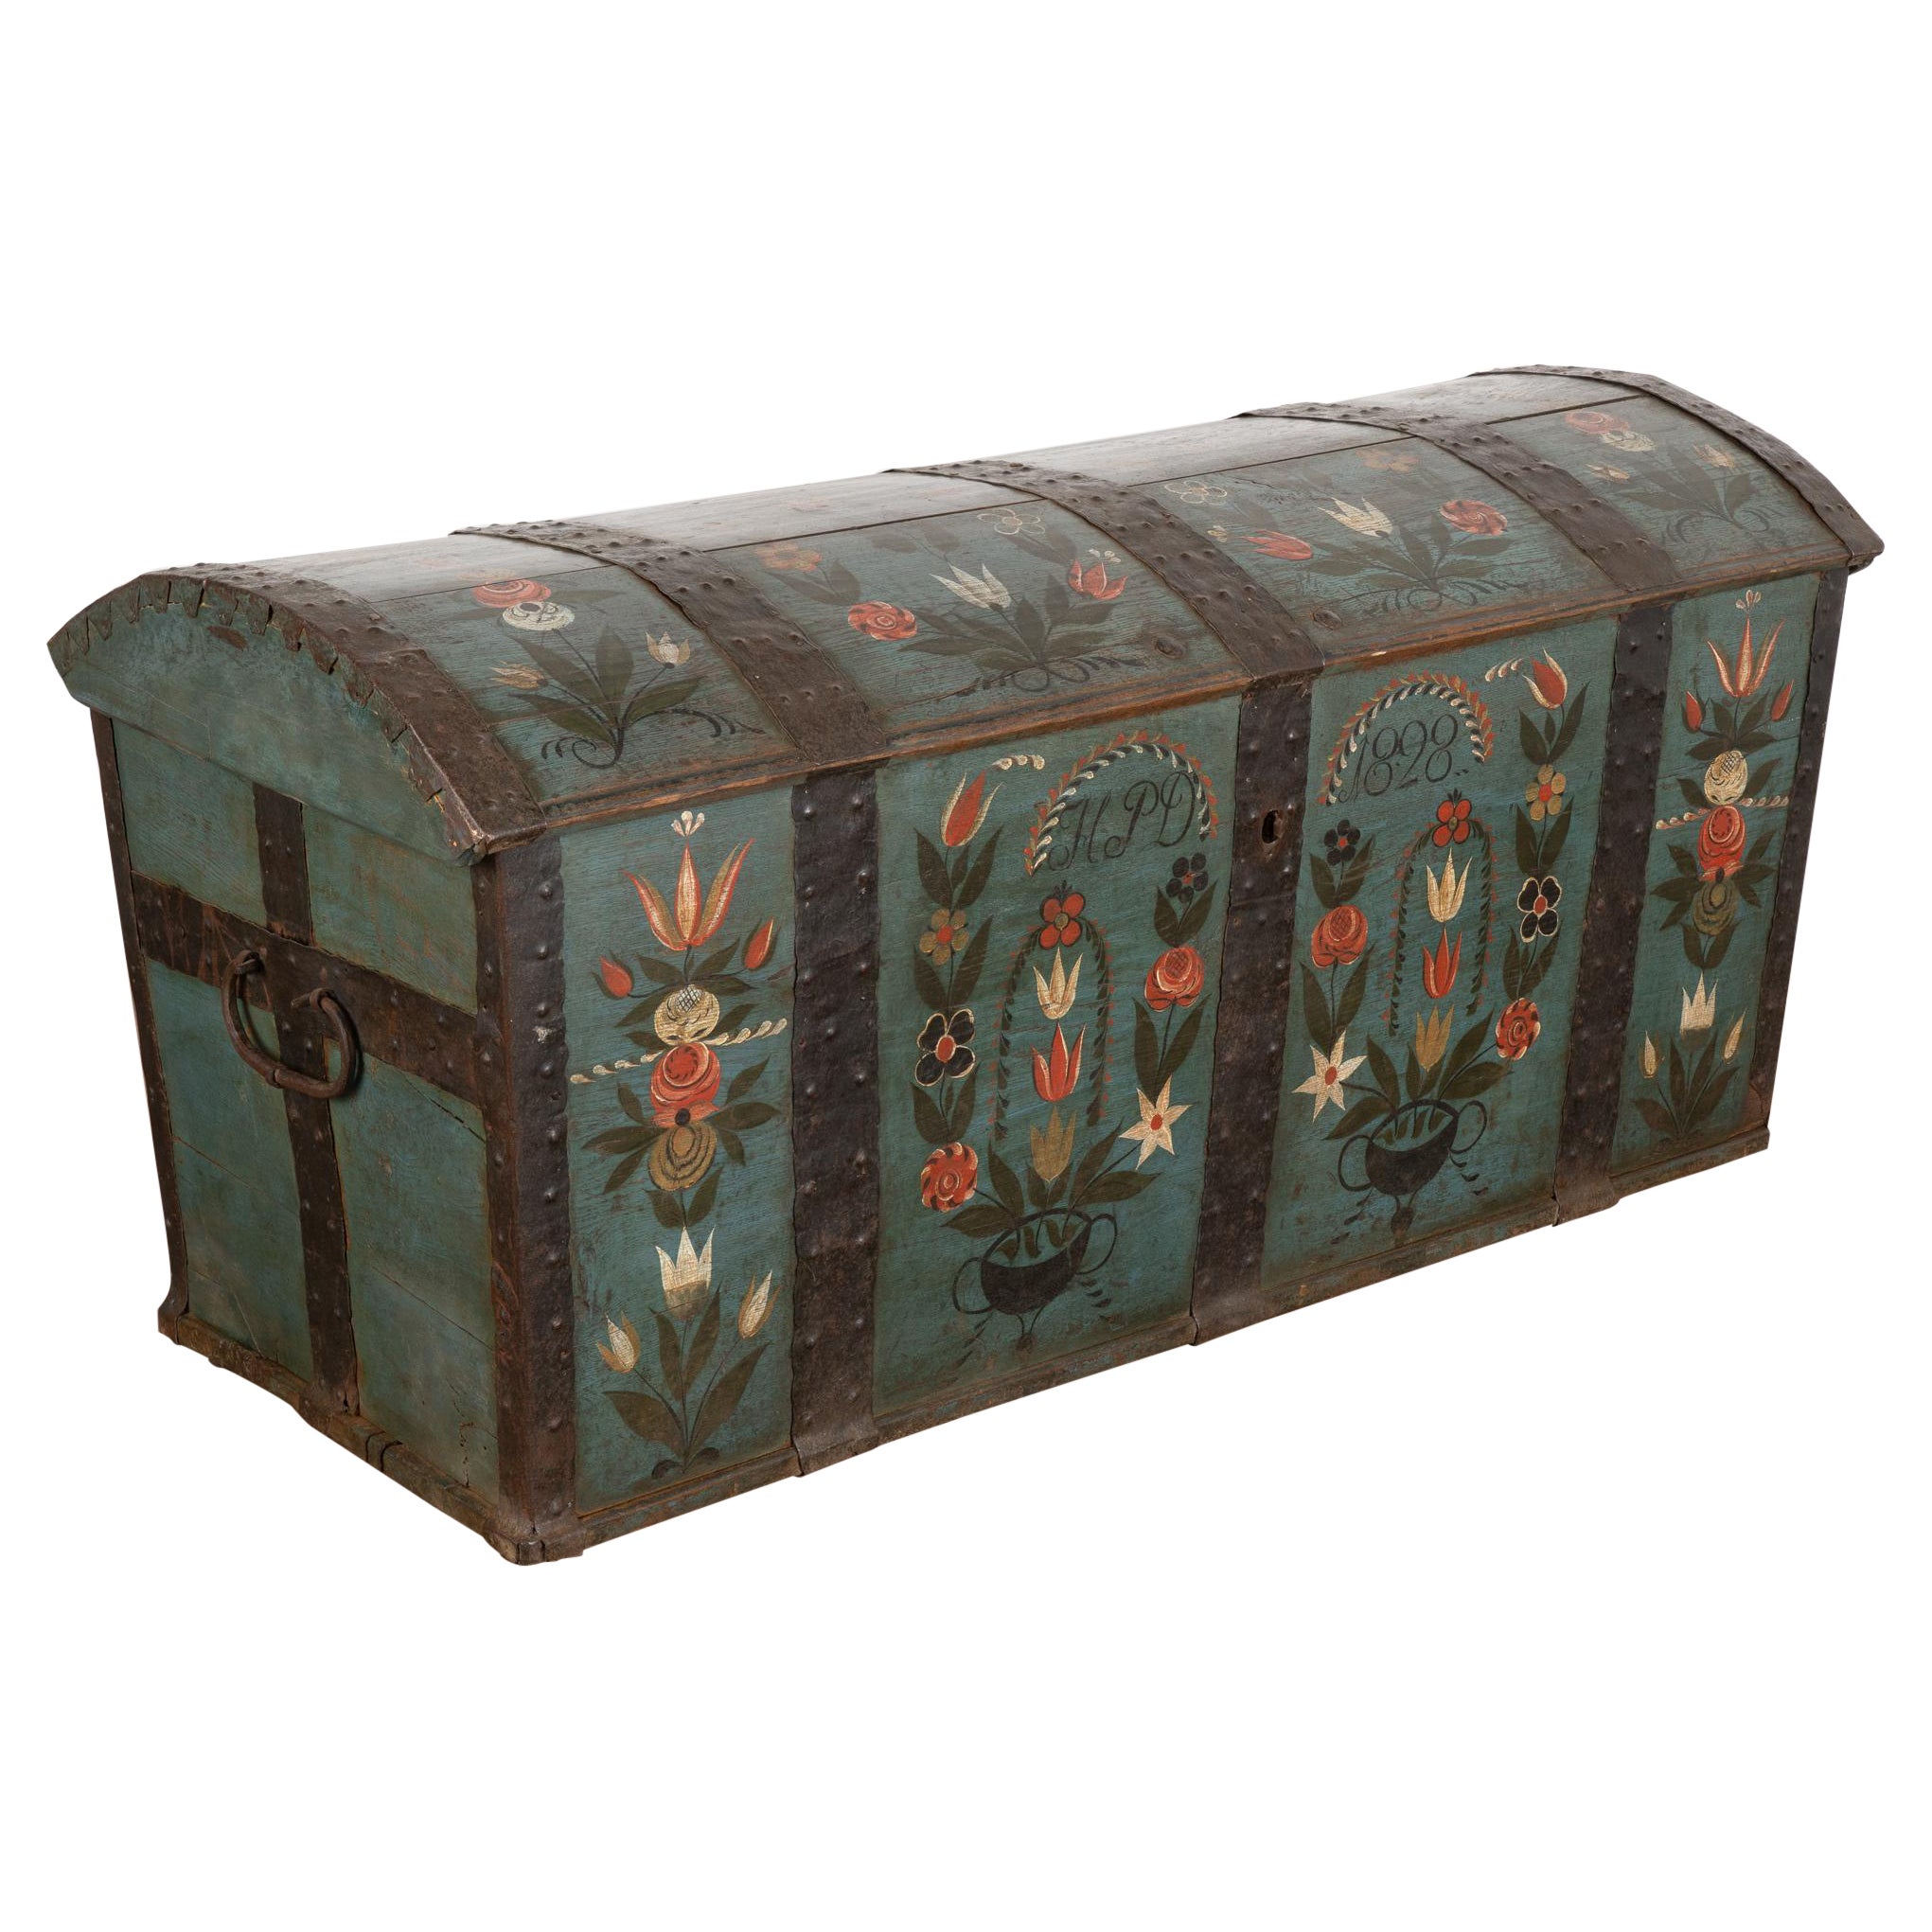 Original Hand Painted Dome Top Blue Trunk With Flowers, Sweden dated 1828 For Sale